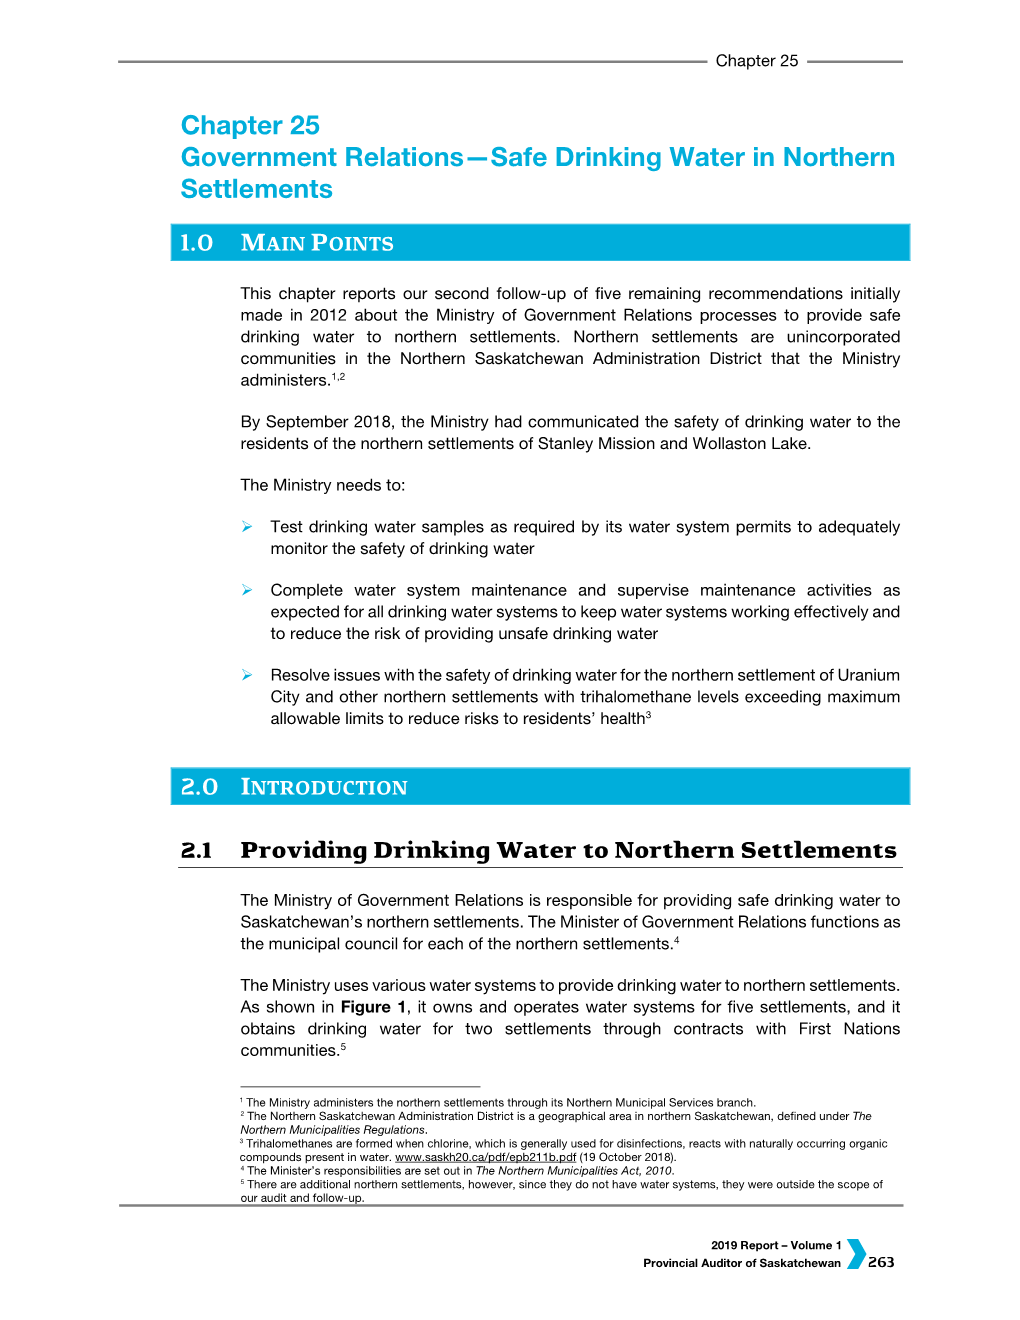 Government Relations—Safe Drinking Water in Northern Settlements